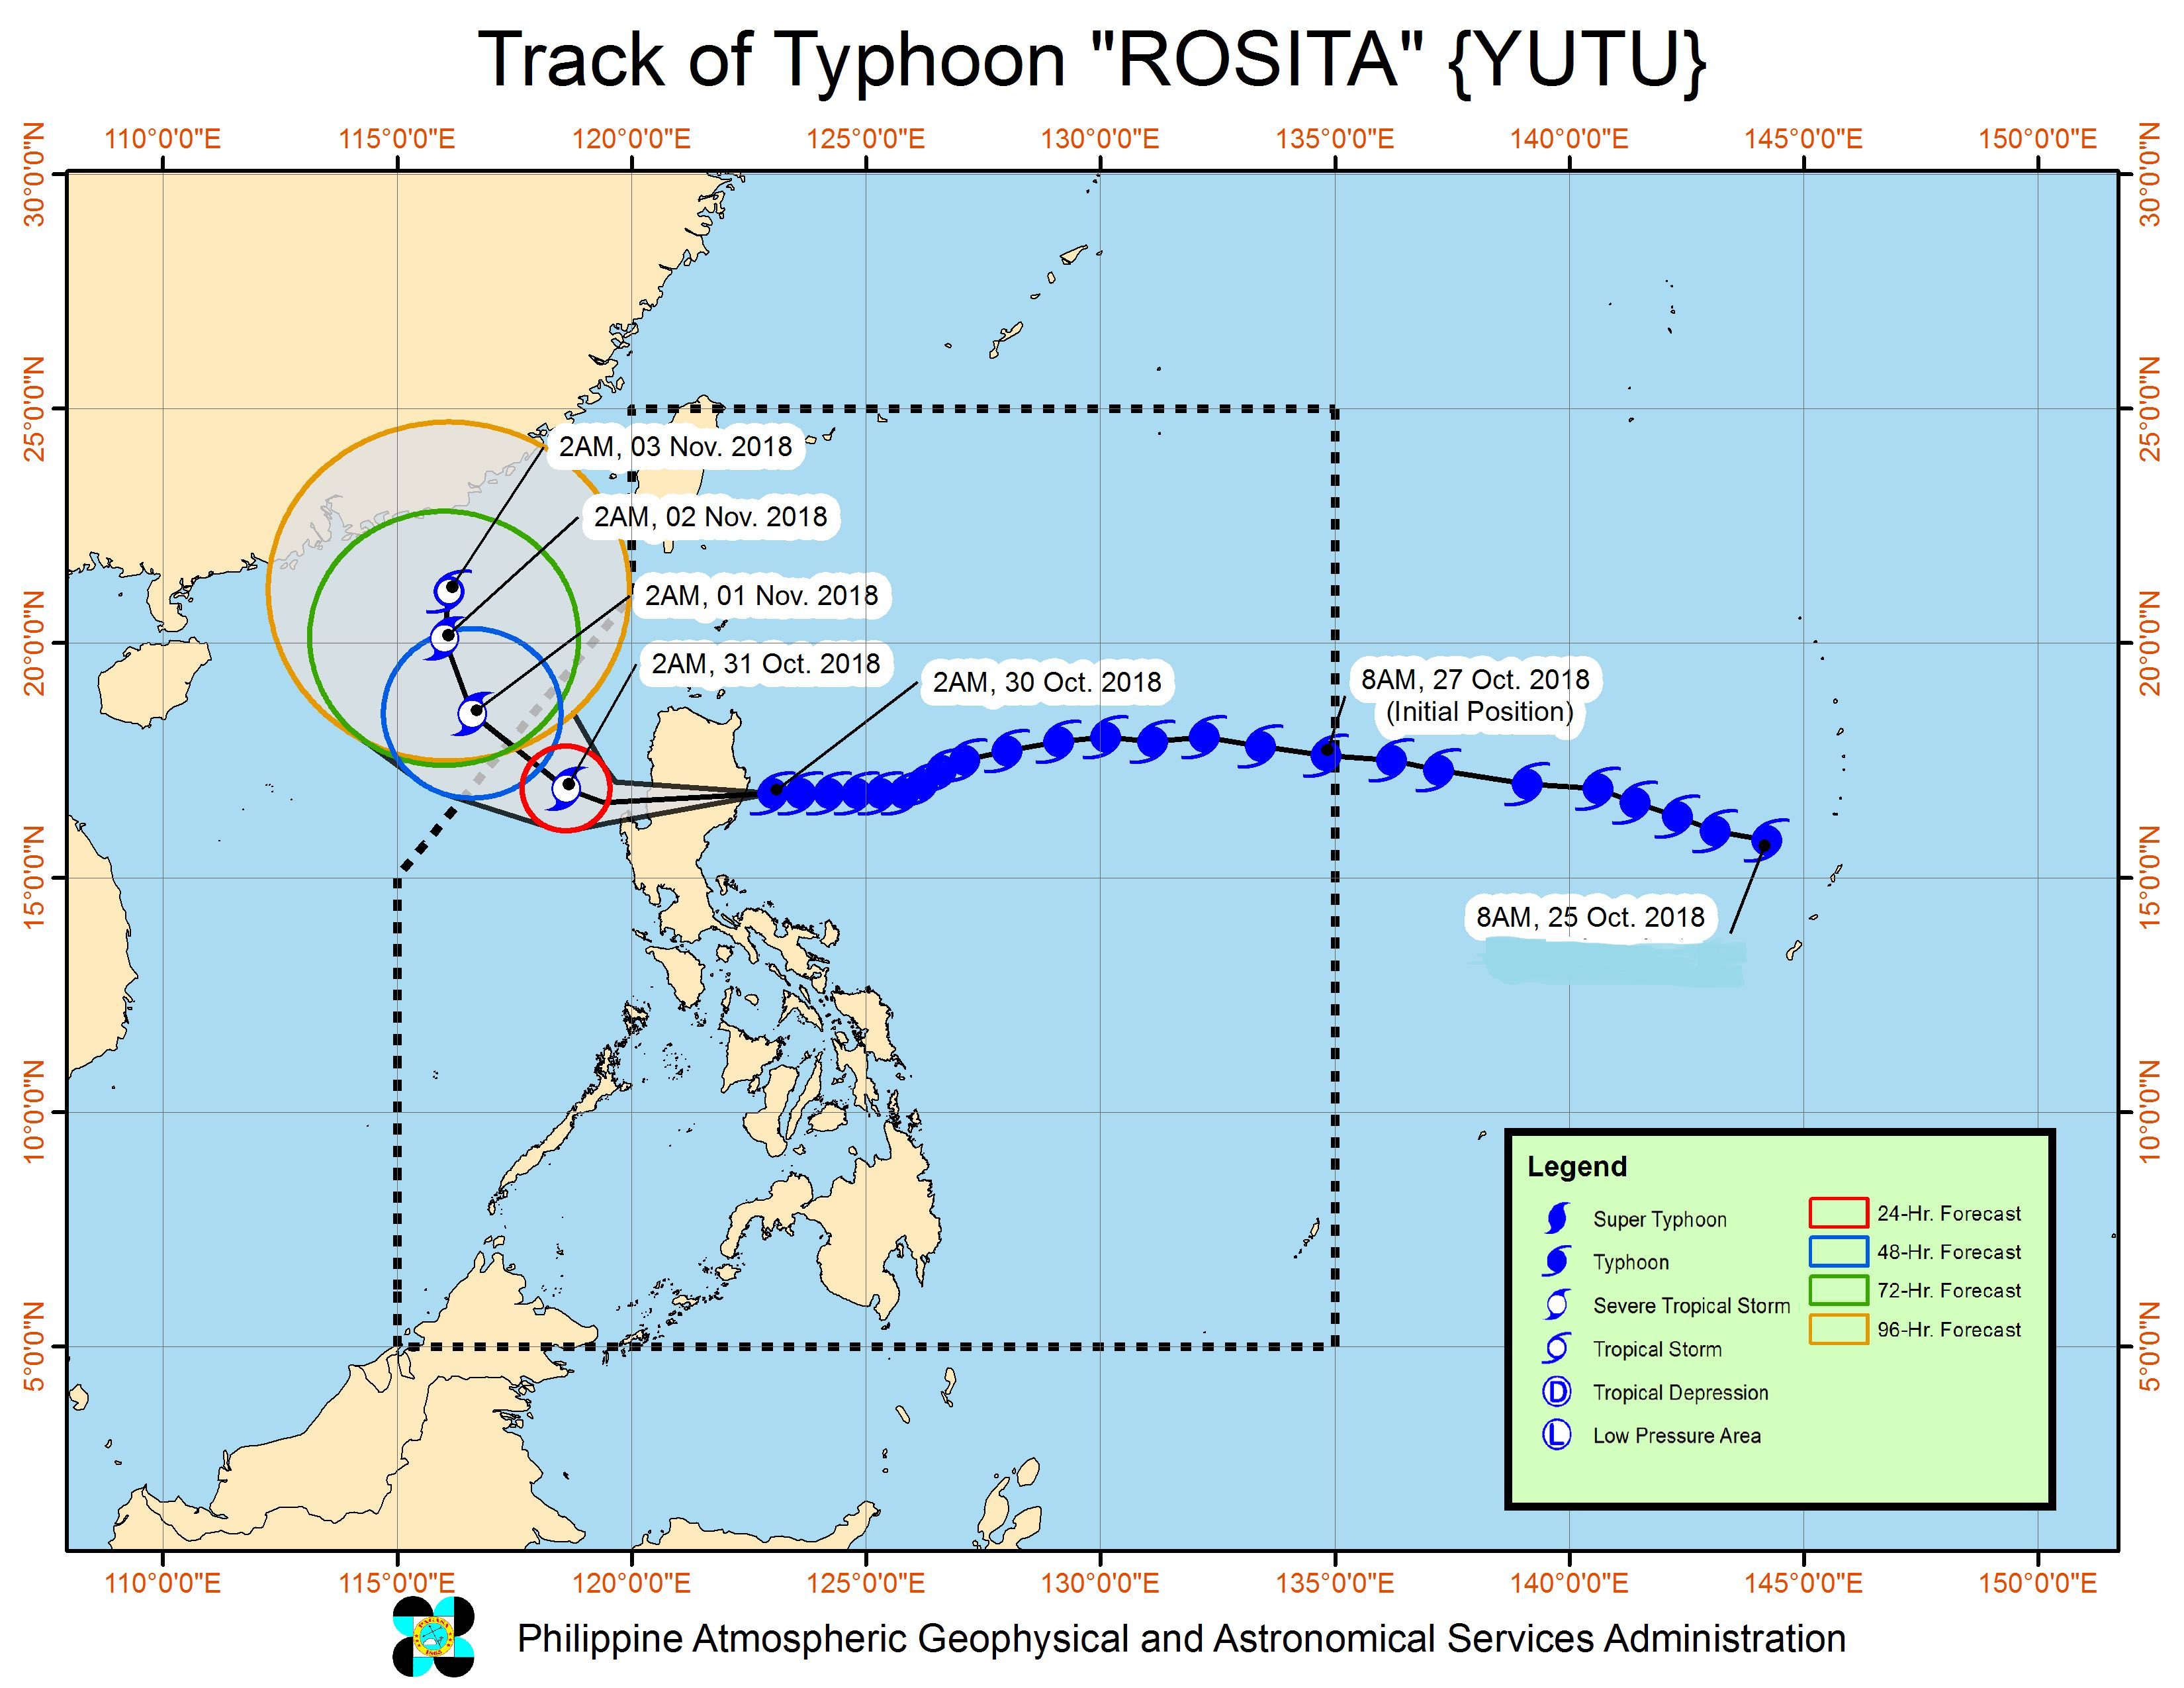 Forecast track of Typhoon Rosita (Yutu) as of October 30, 2018, 5 am. Image from PAGASA 